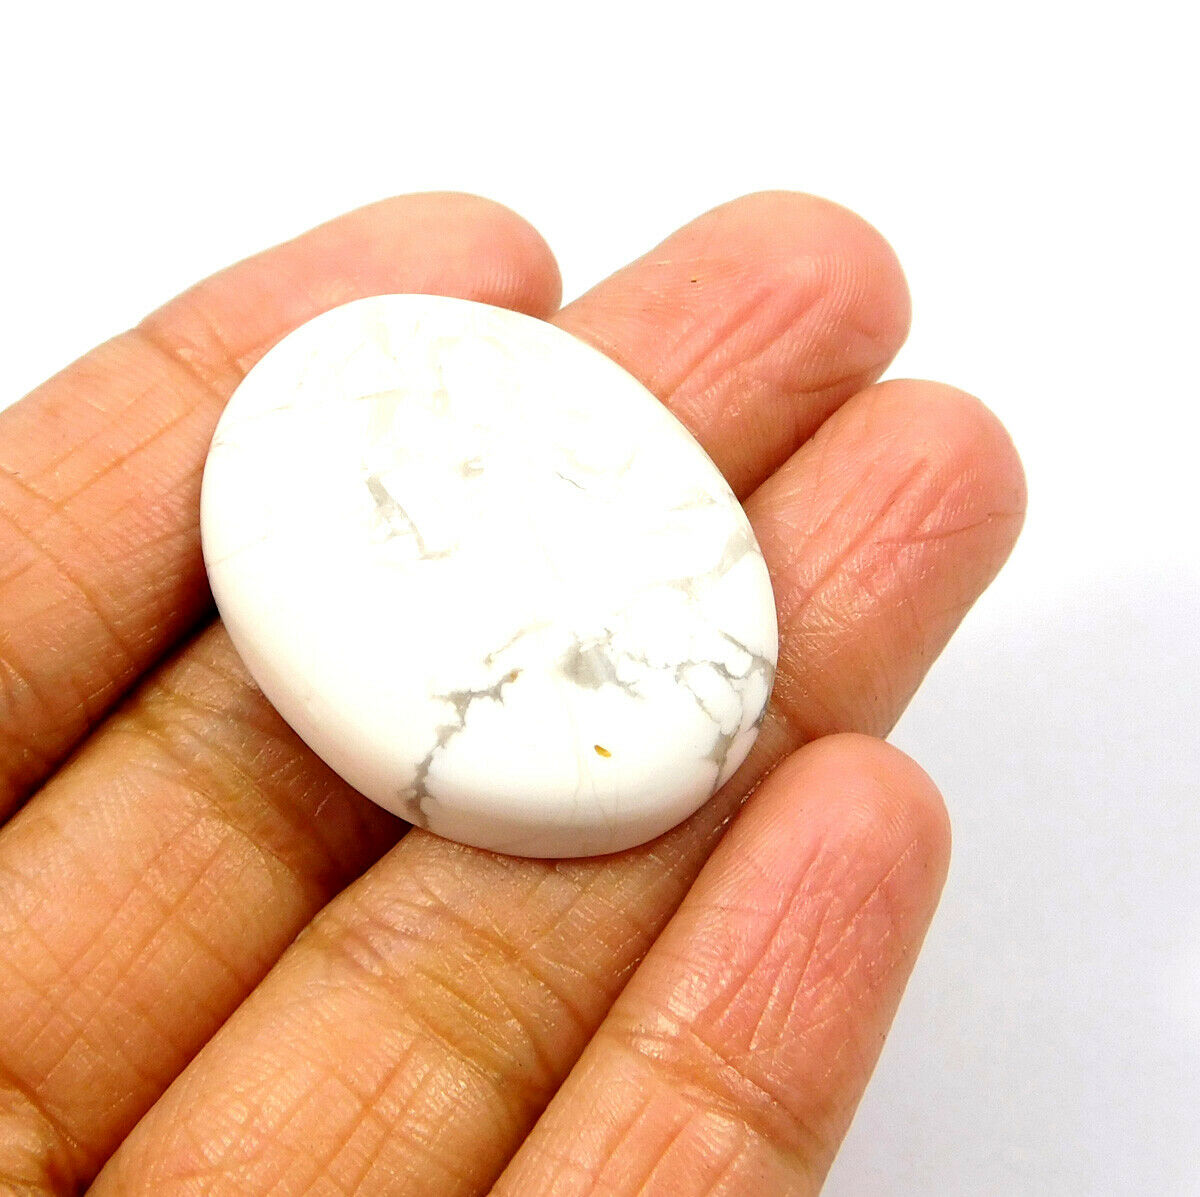 41 Cts. 100% Natural White Color Howlite Cabochon Gemstone Sng22917